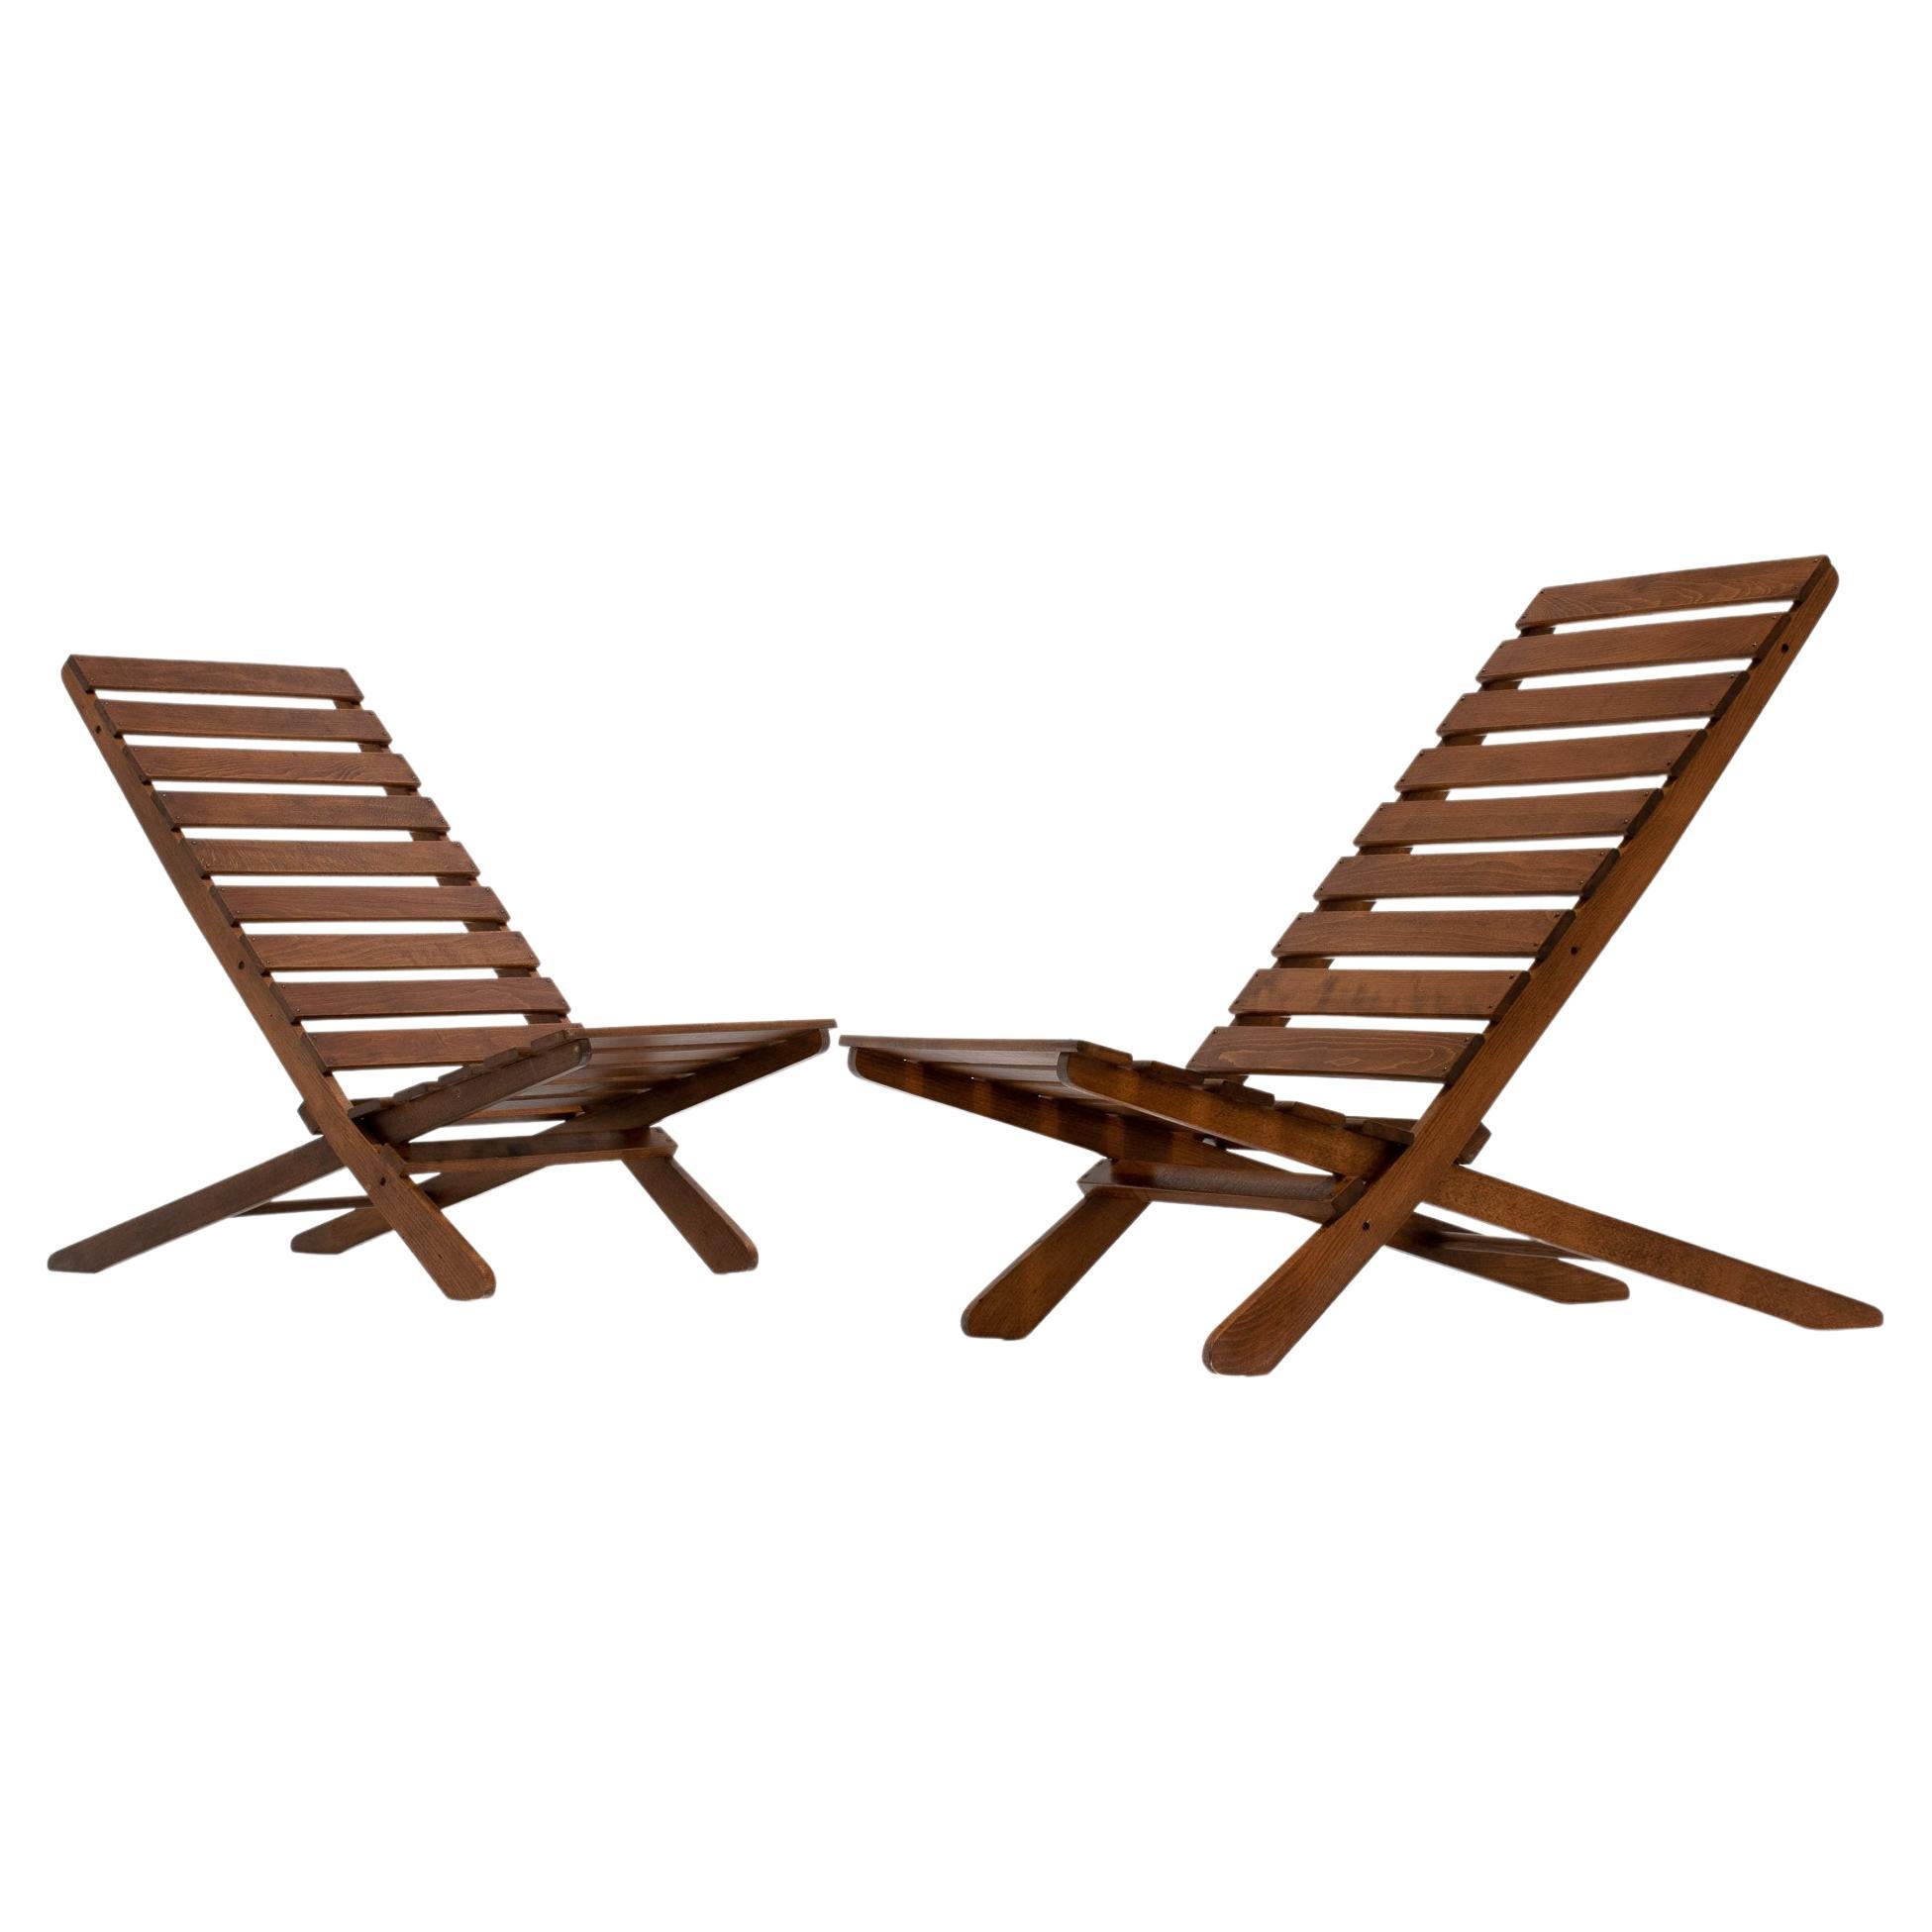 Pair of French Folding Chairs in Stained Teak, France 1950s For Sale